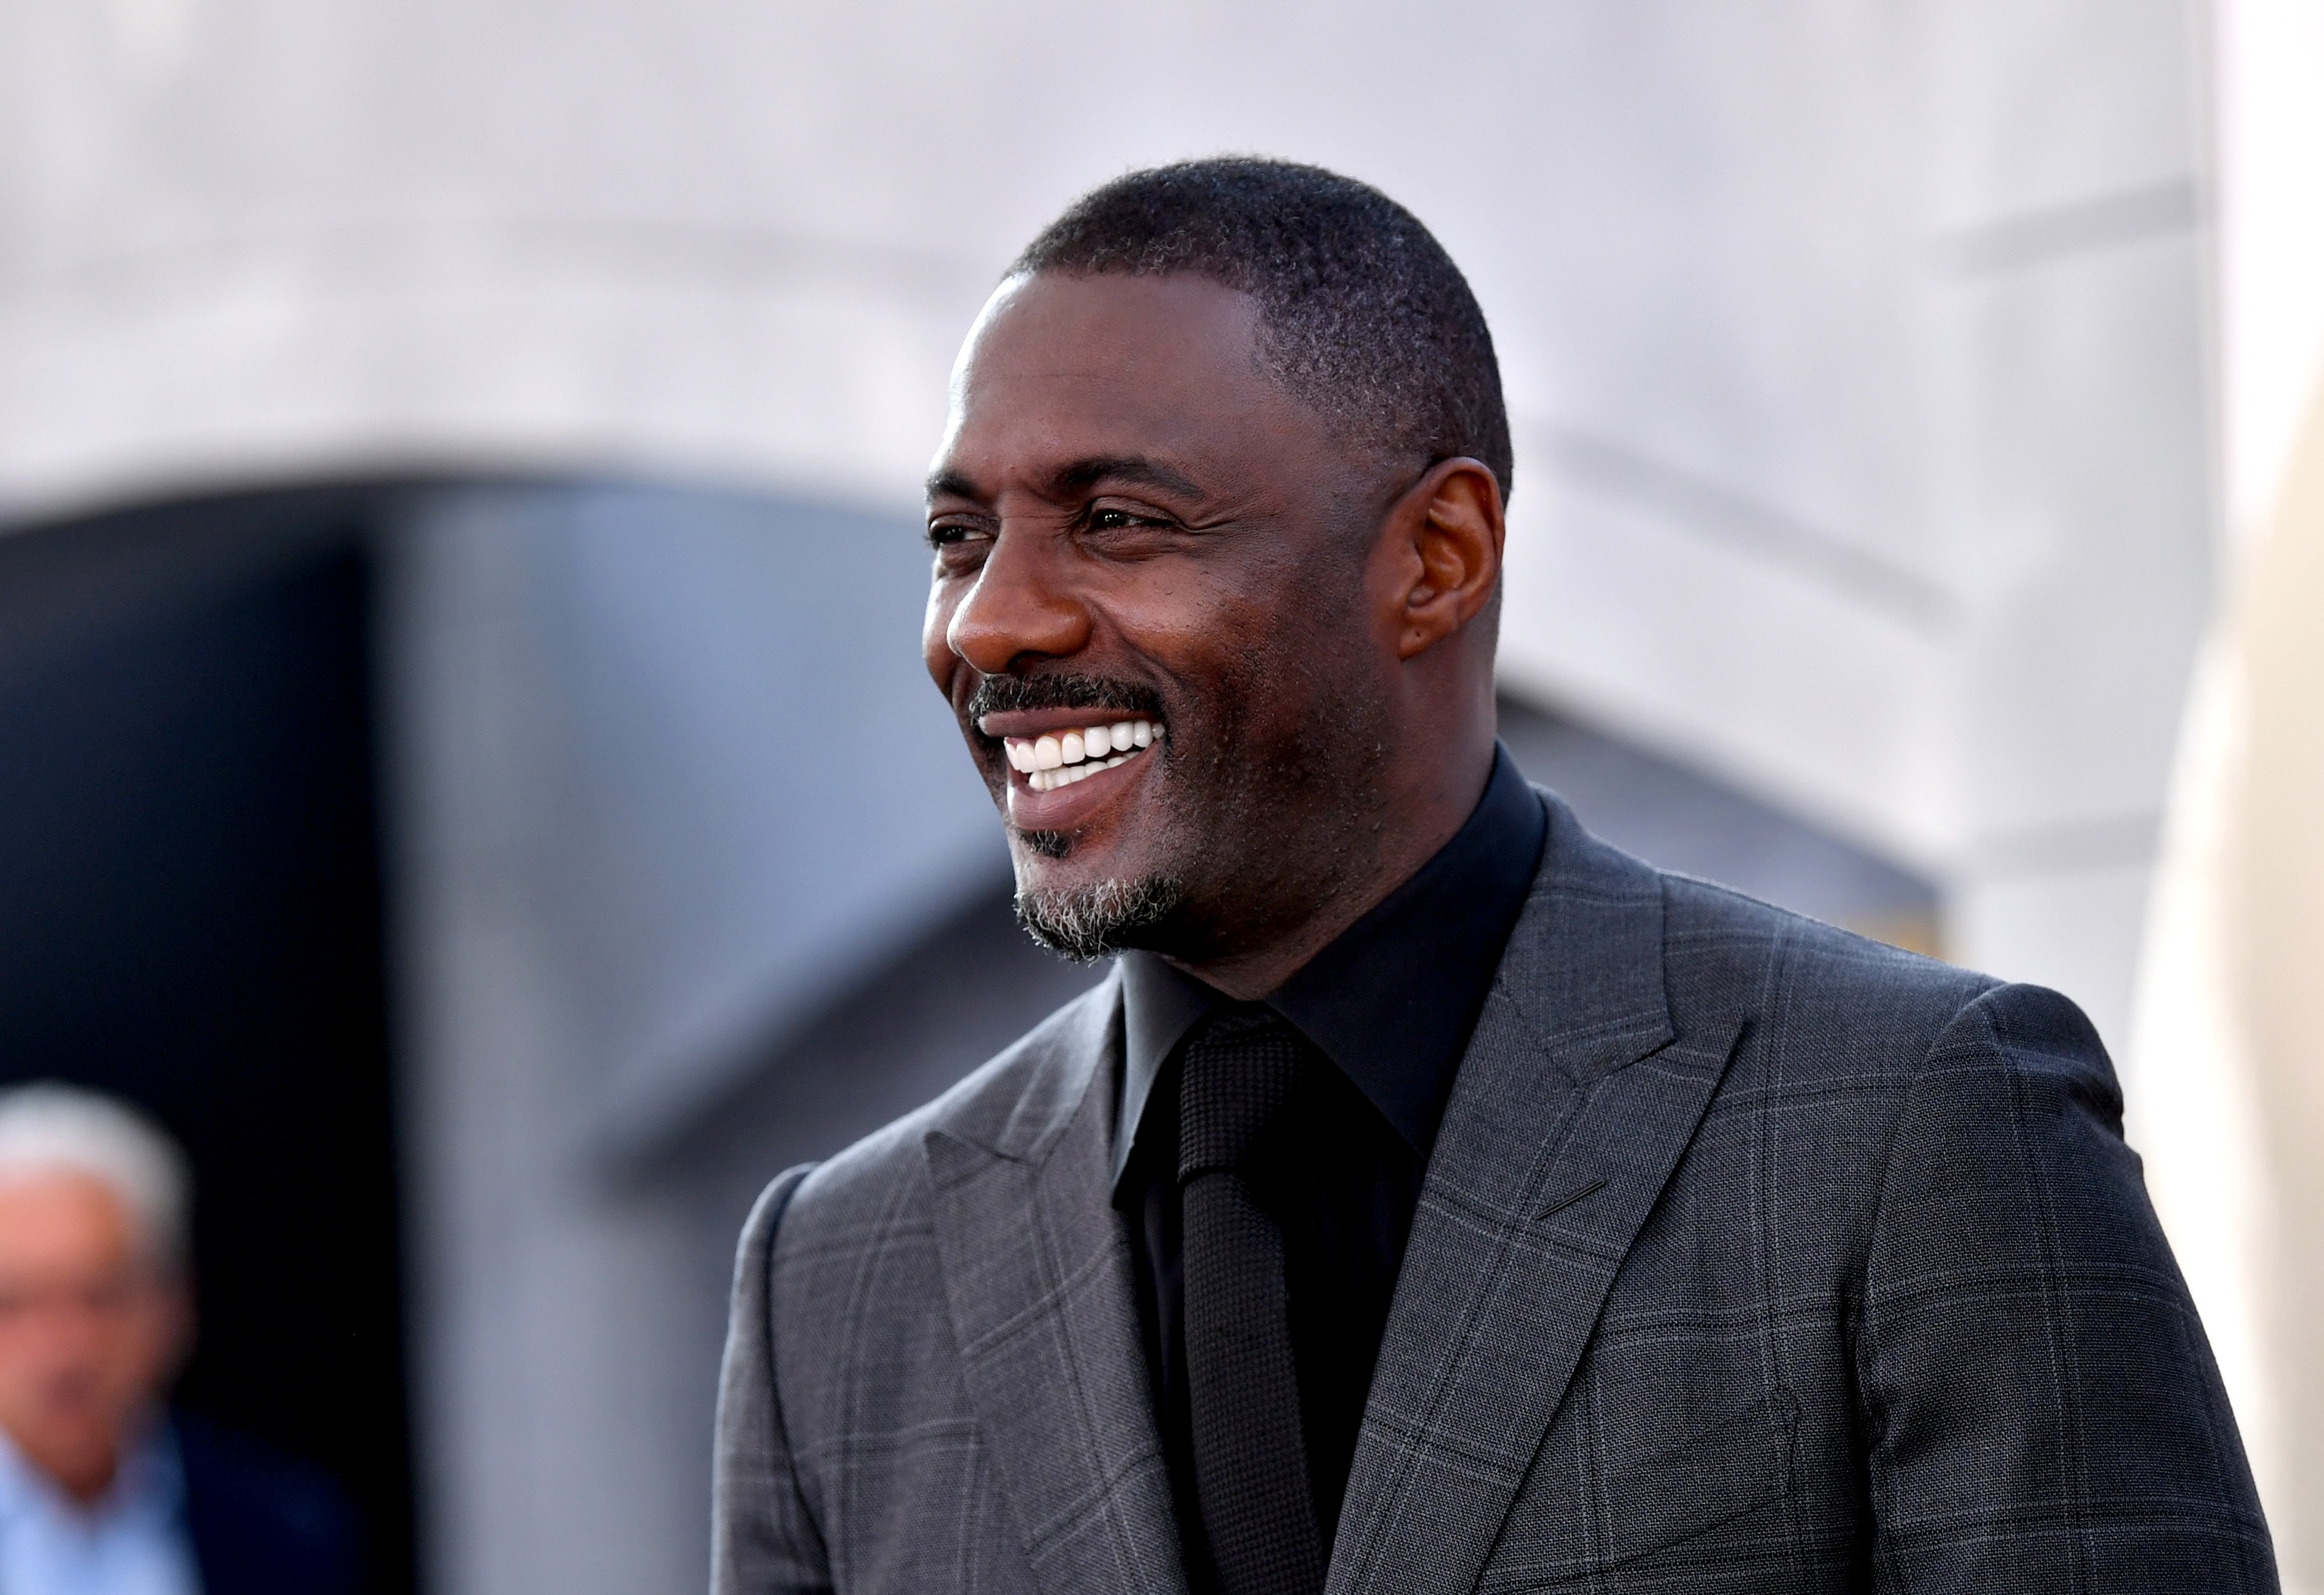 Idris Elba, star of Netflix They Harder They Fall movie, flashes a smiles